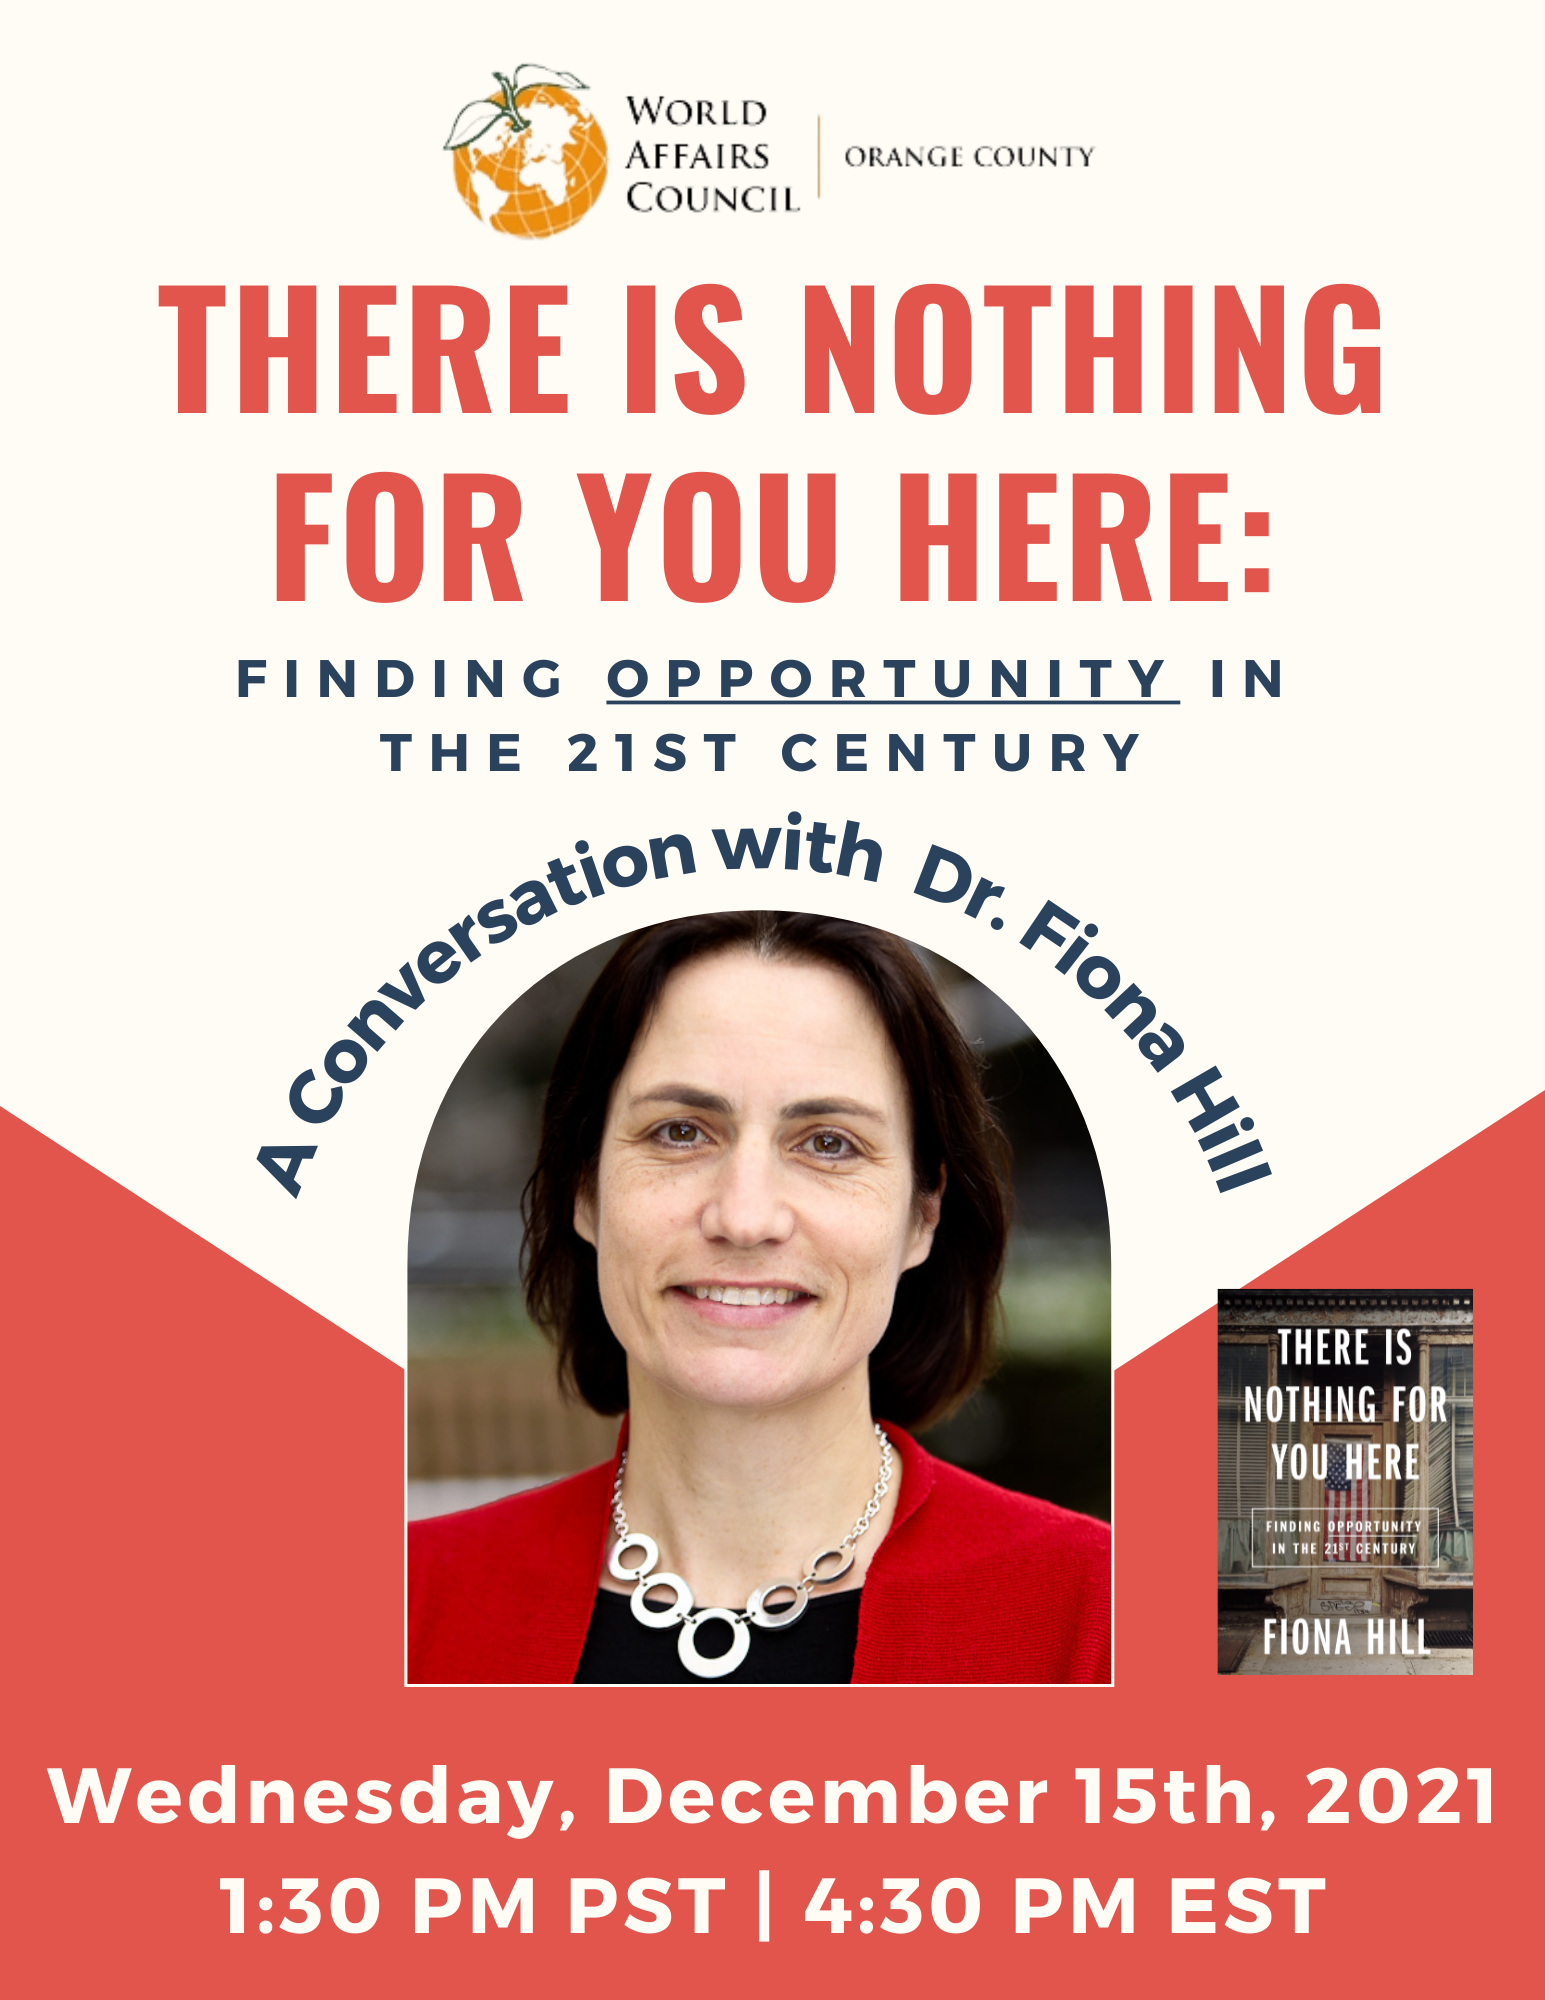 "There Is Nothing for You Here: Finding Opportunity in the 21st Century" A Conversation with Dr. Fiona Hill